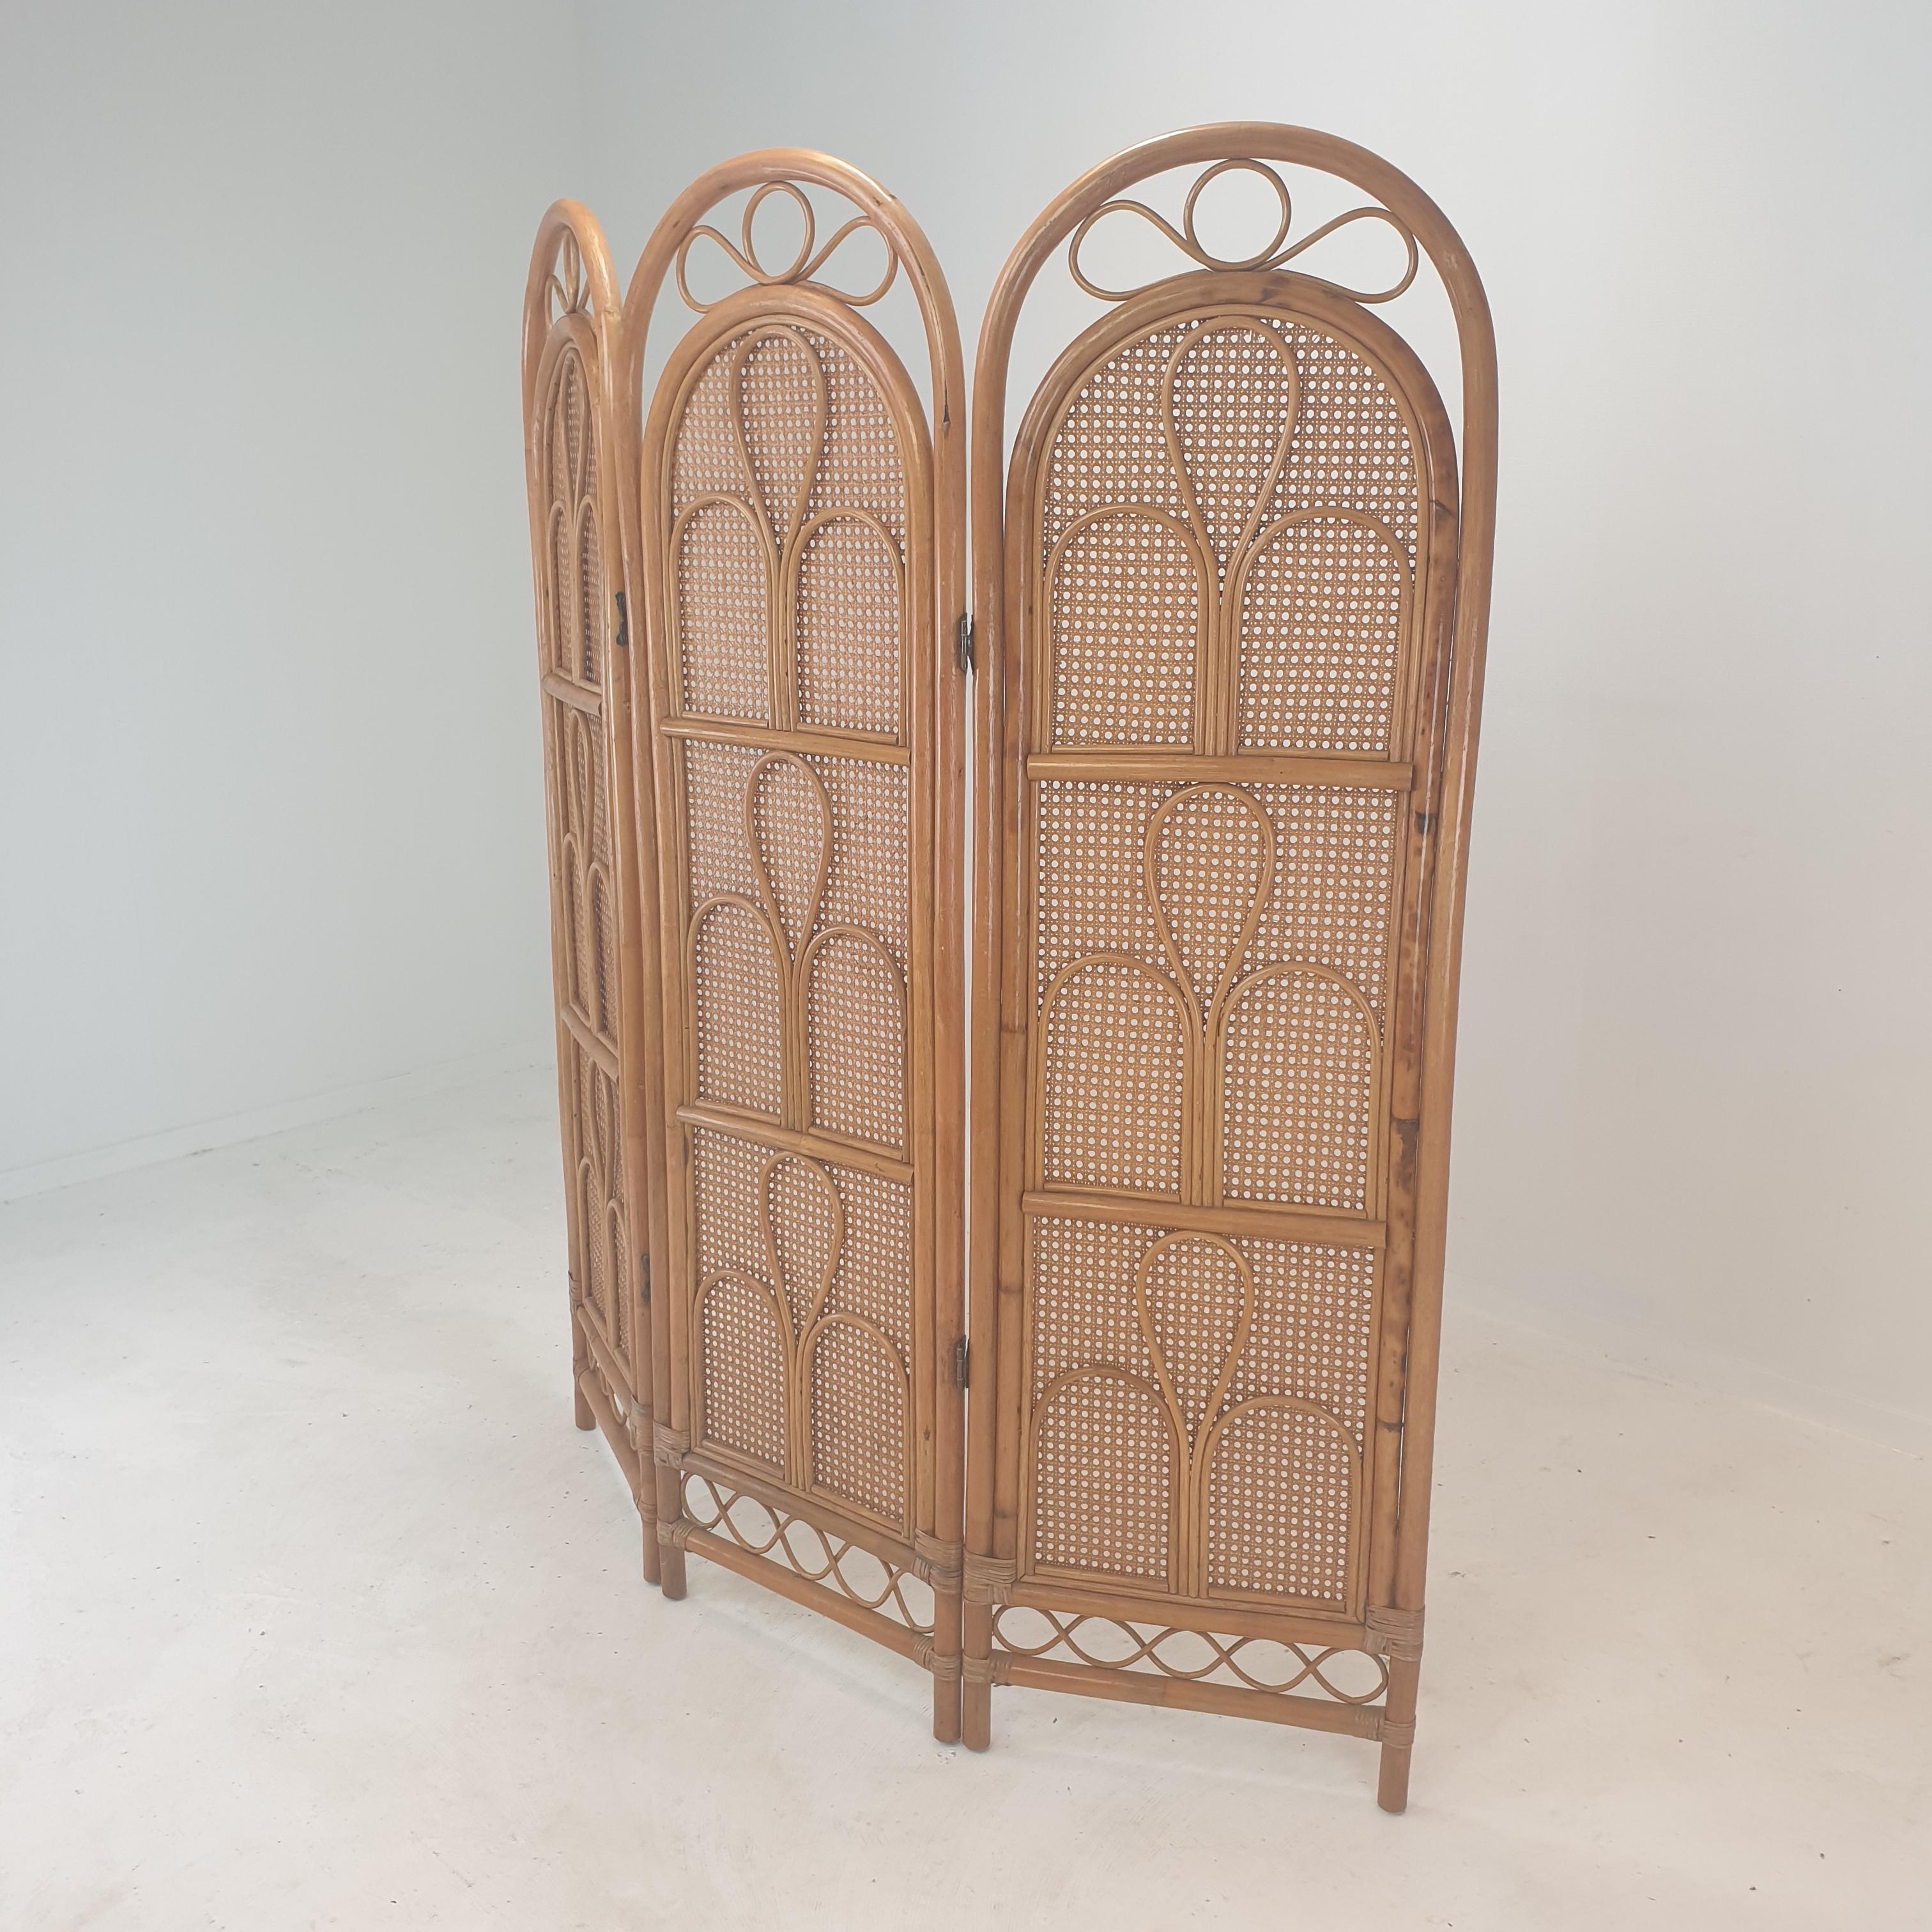 Italian Room Divider in Rattan and Wicker, 1960s For Sale 1